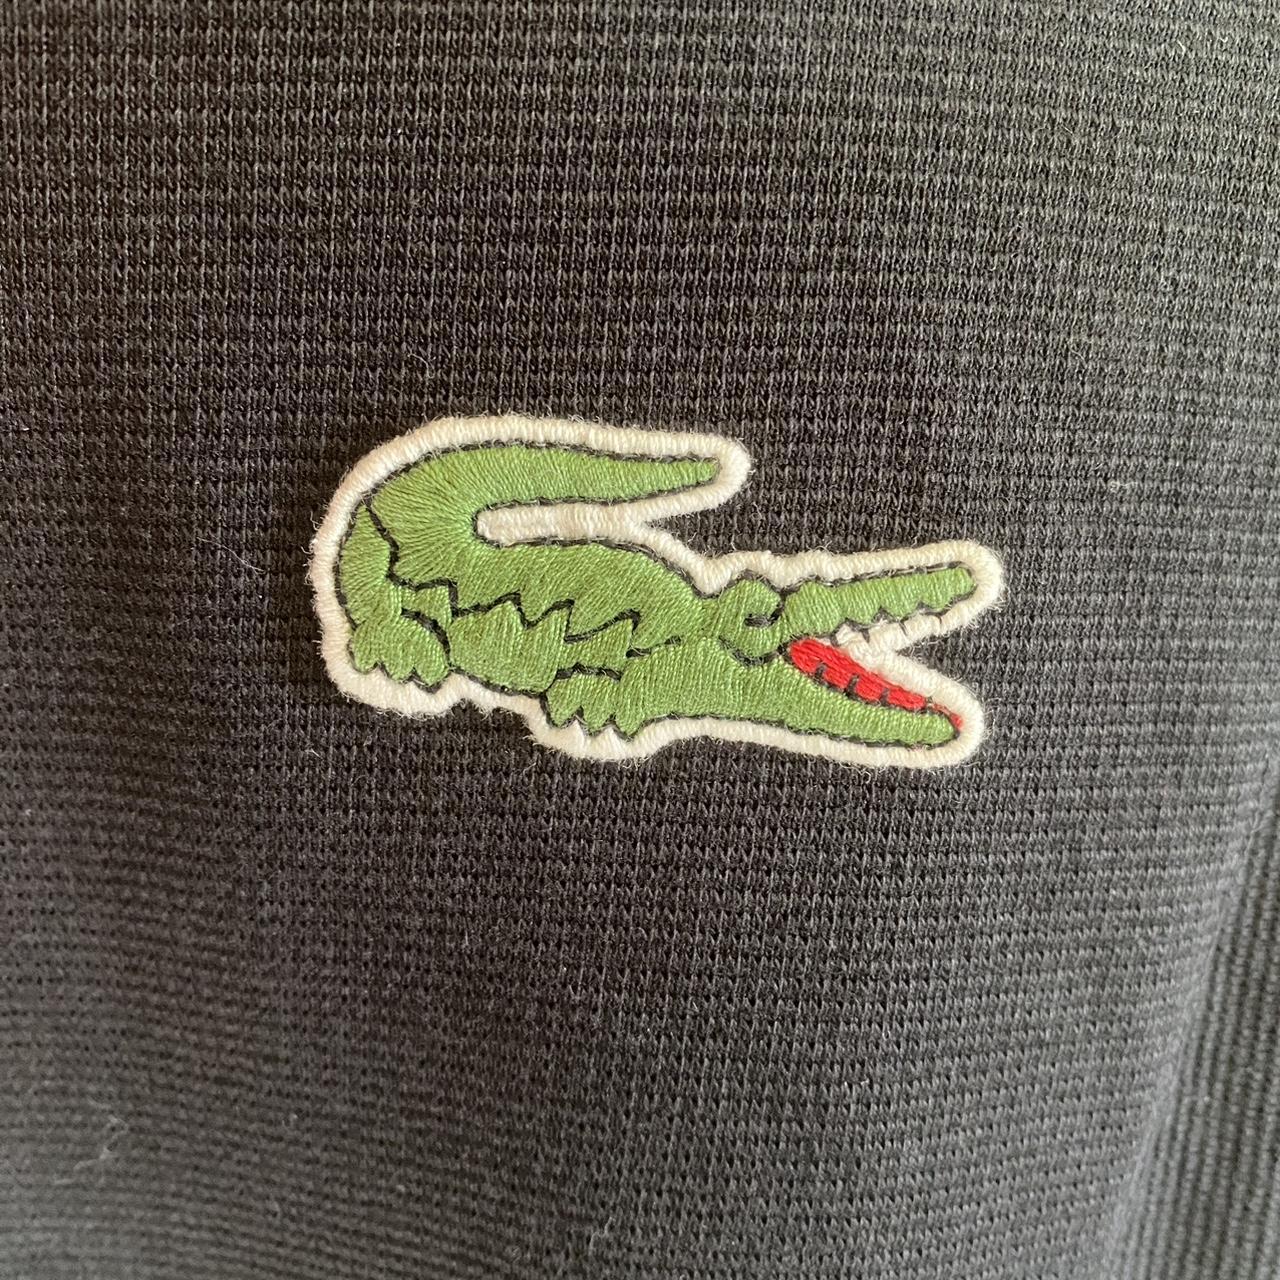 Lacoste Andy Roddick Limited Edition Polo... - Depop